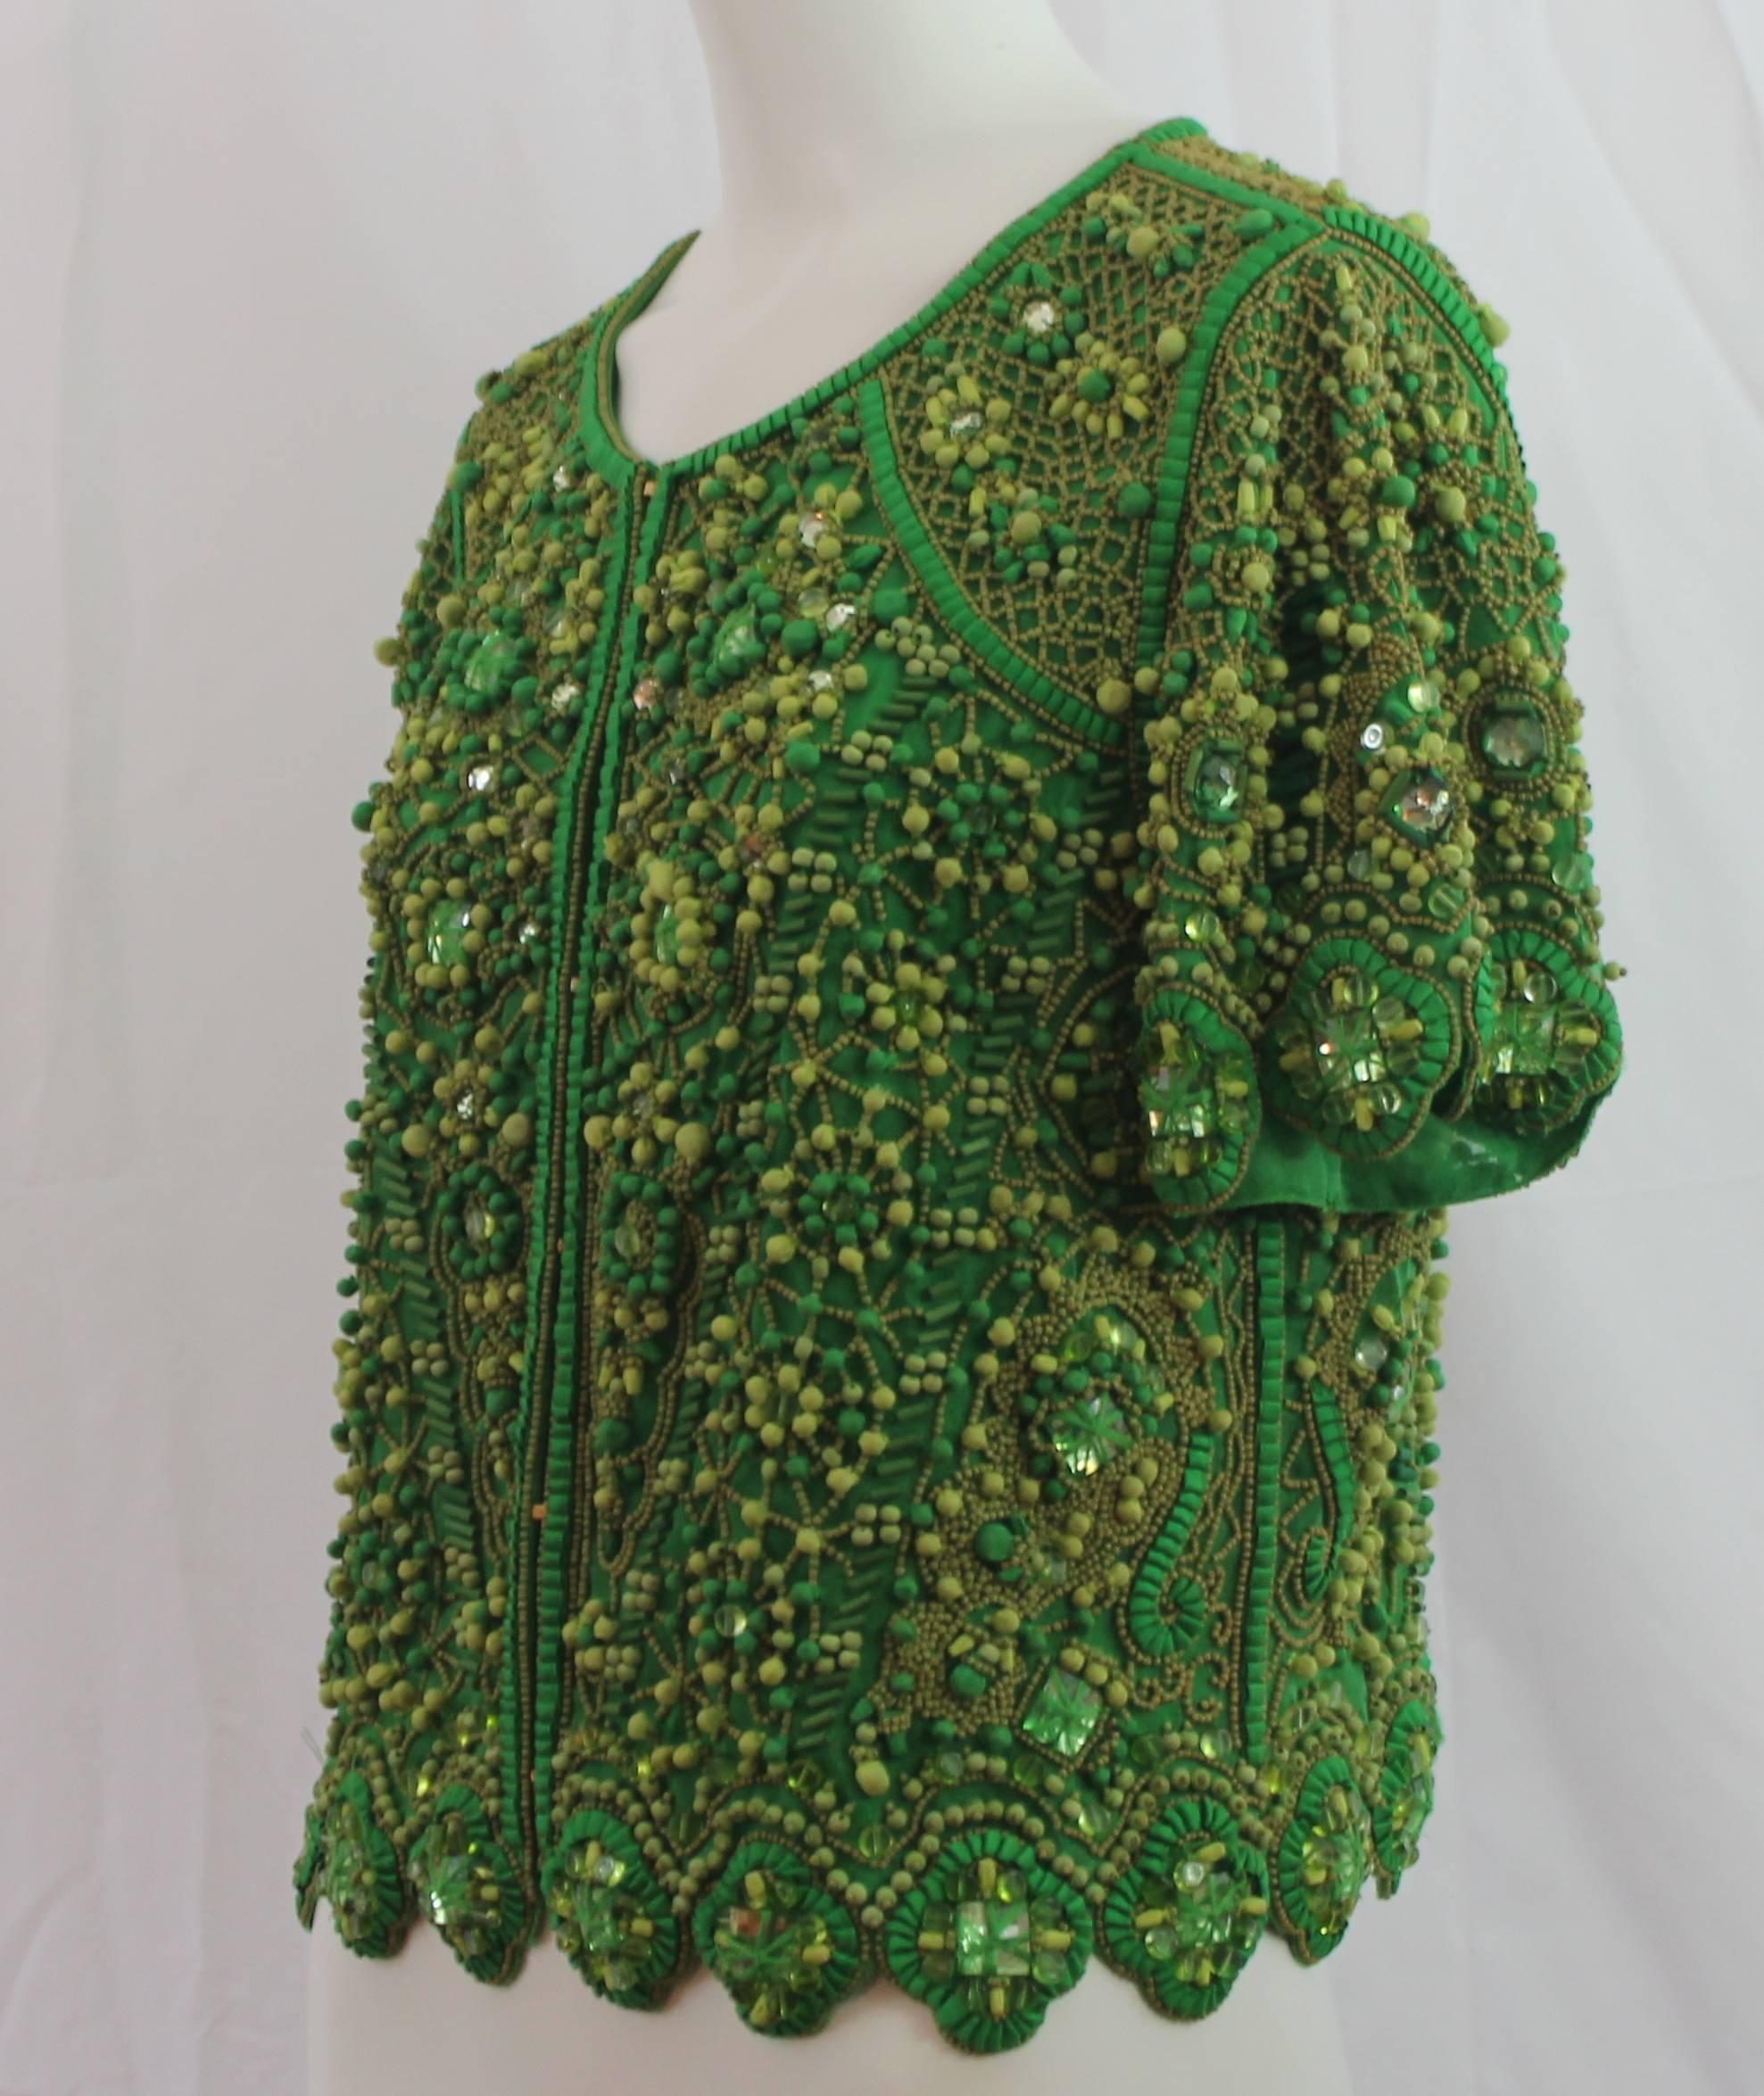 Escada Green Silk Heavily Beaded Jacket/Top - 36 This beautiful and very unique top/jacket has short sleeves and is heavily beaded throughout the entire garment with green and tan beads of different sizes and textures. The front has hidden hook and